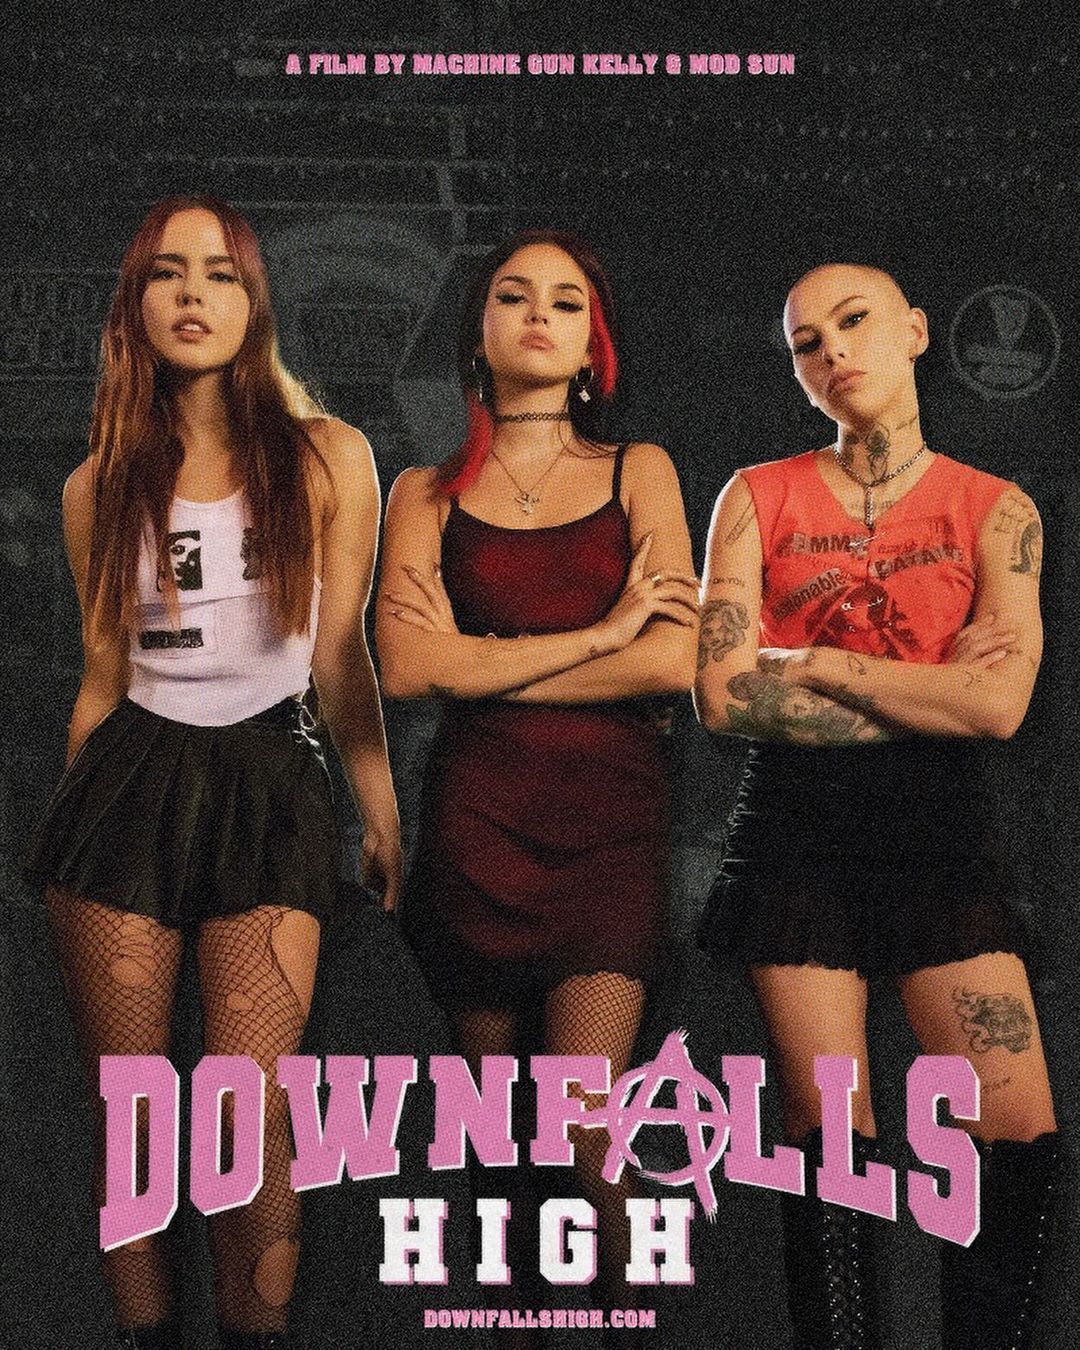 MAGGIE LINDEMANN on Instagram: “Downfalls High, a first of its kind musical film experience, premieres tonight at 6pm PST. Maggie lindemann, Girl photo, Mod sun